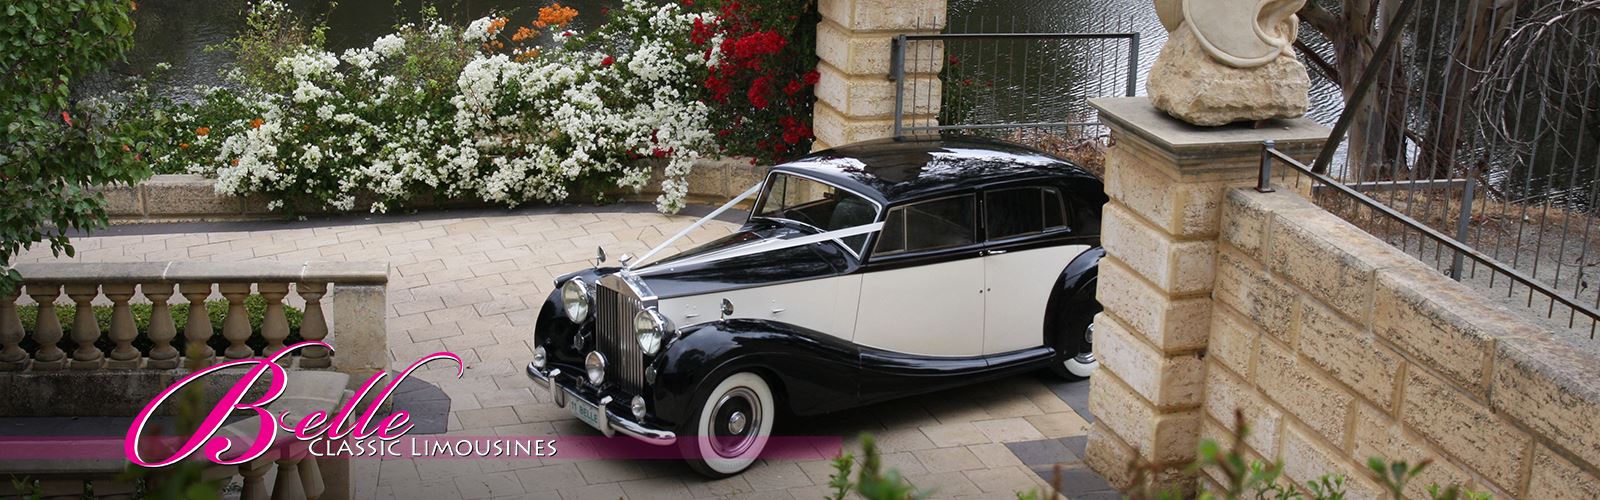 belle classic limousines wedding car providers